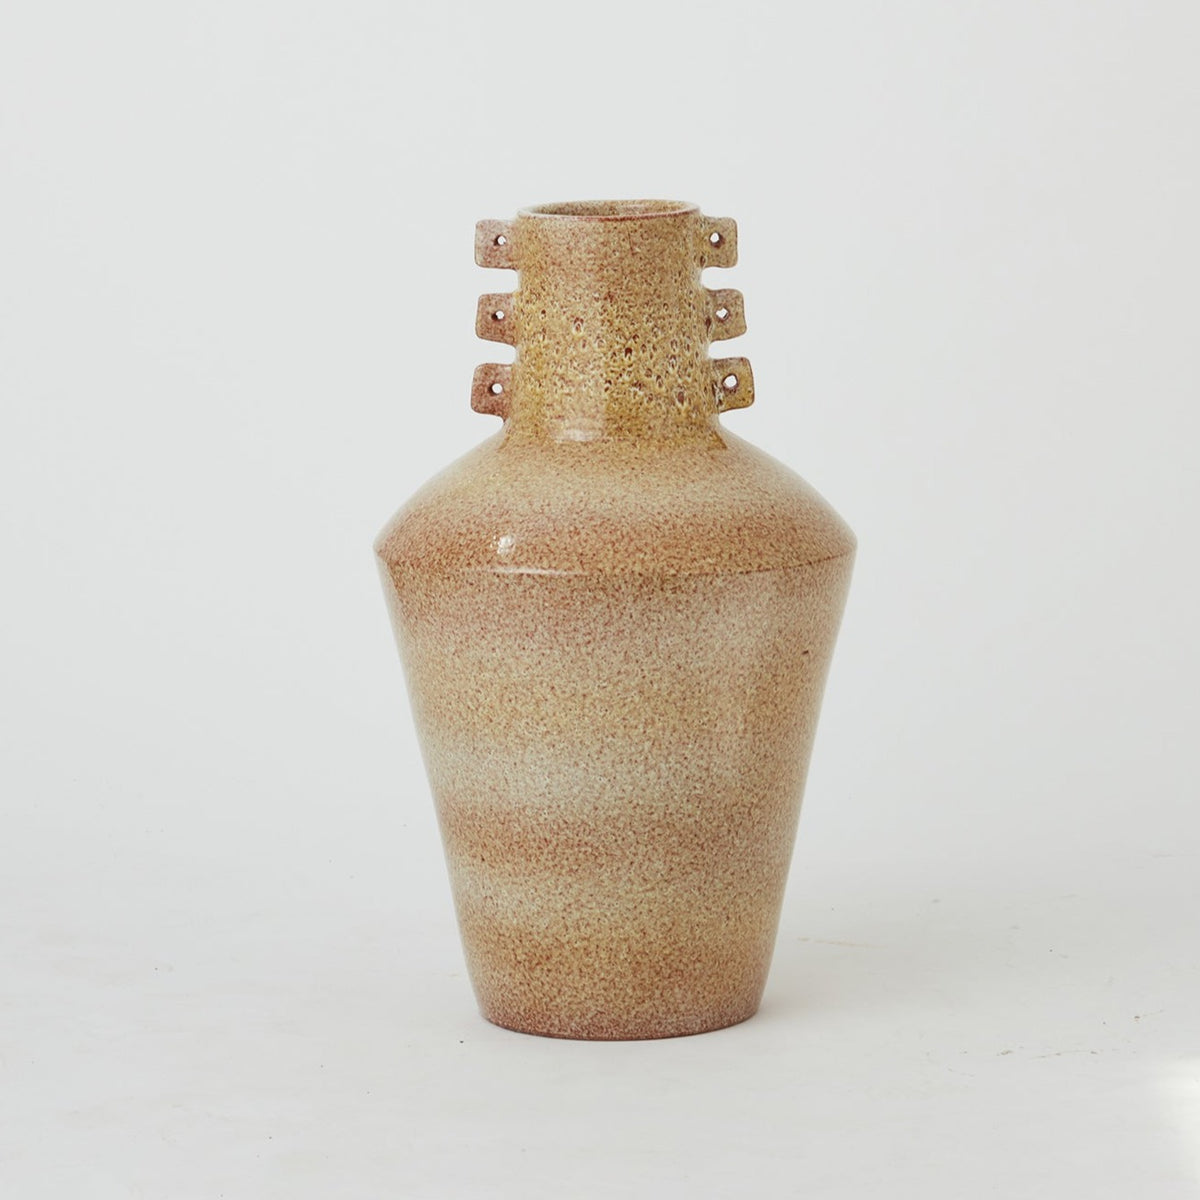 Spouted ceramic pot with six ribs